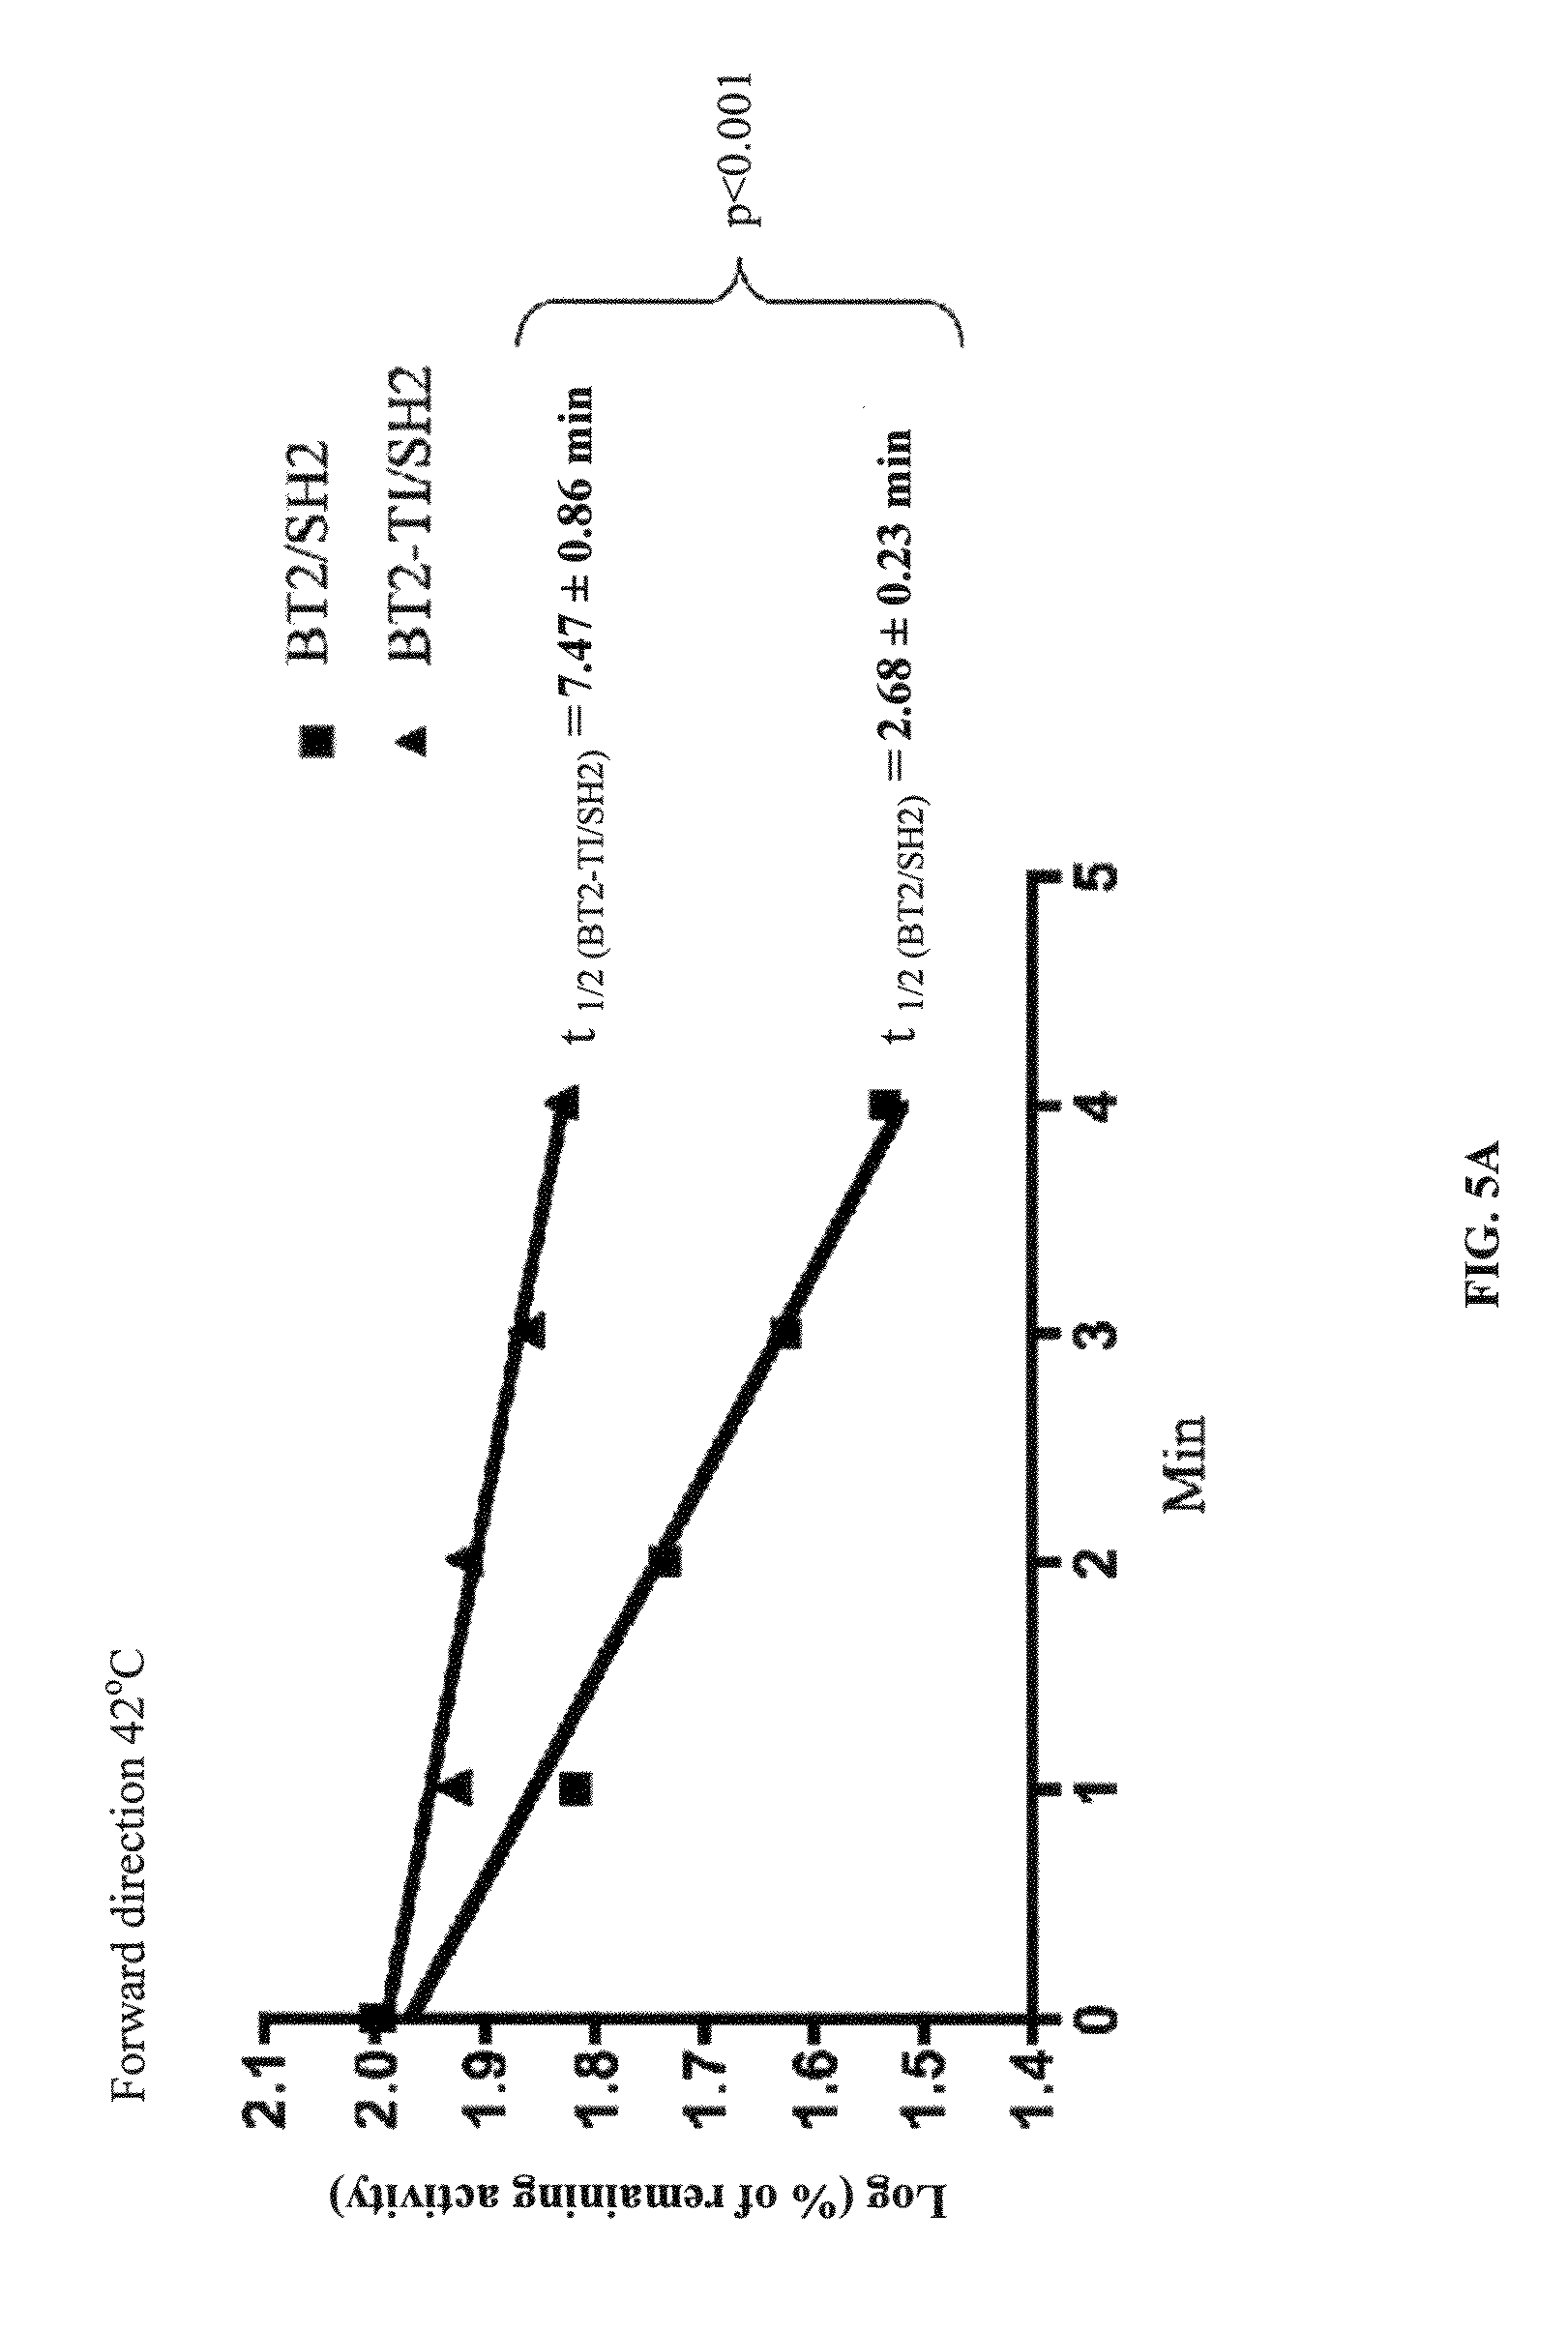 Heat resistant plants and plant tissues and methods and materials for making and using same